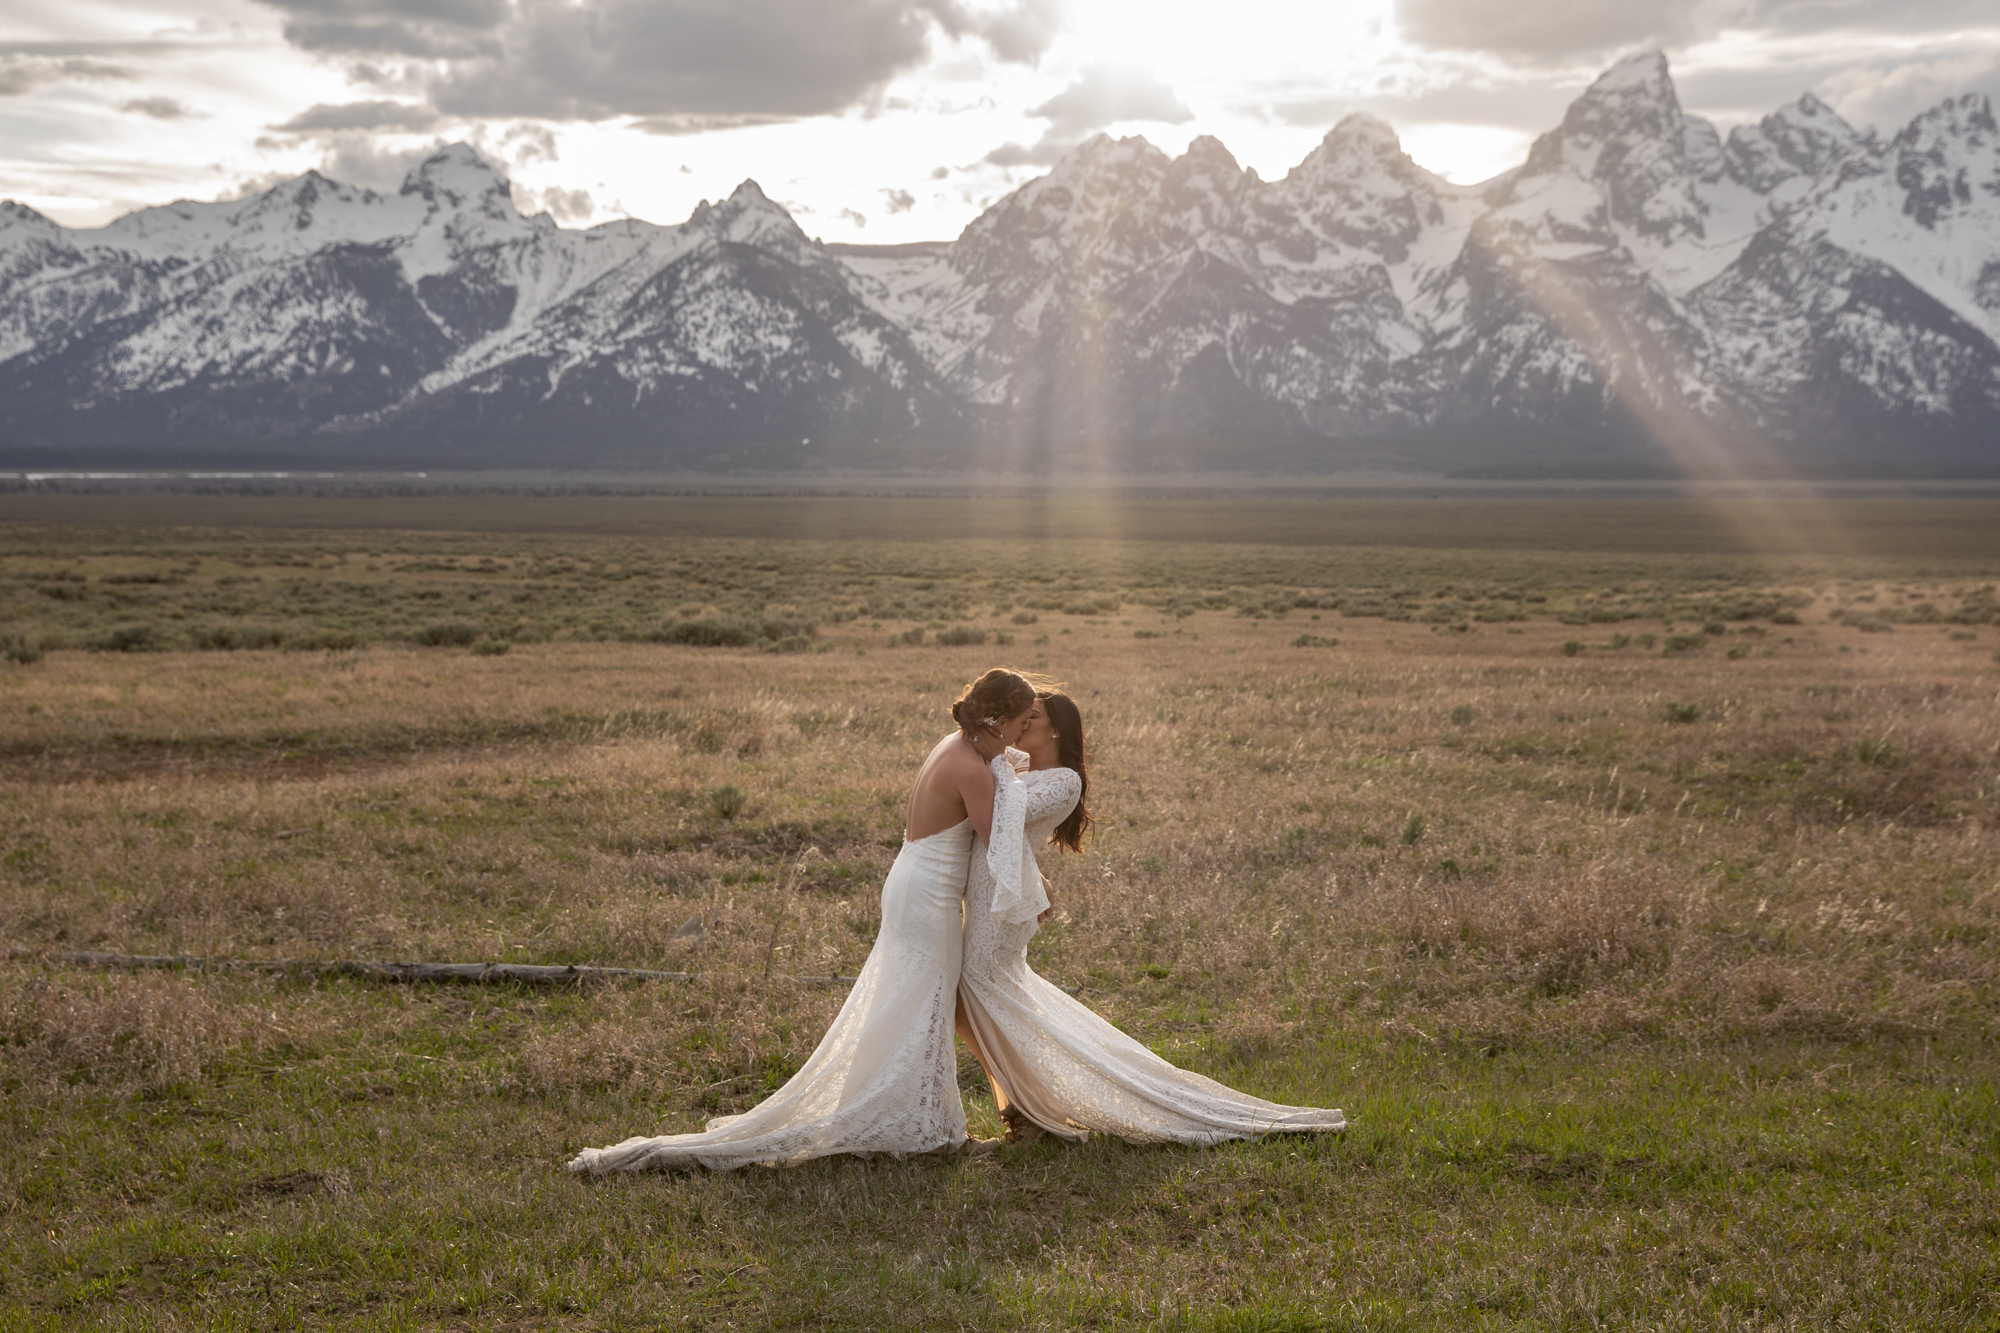 Brides share a passionate kiss on their Jackson Hole elopement day, as the sunsets behind them and the Grand Teton mountains glow.